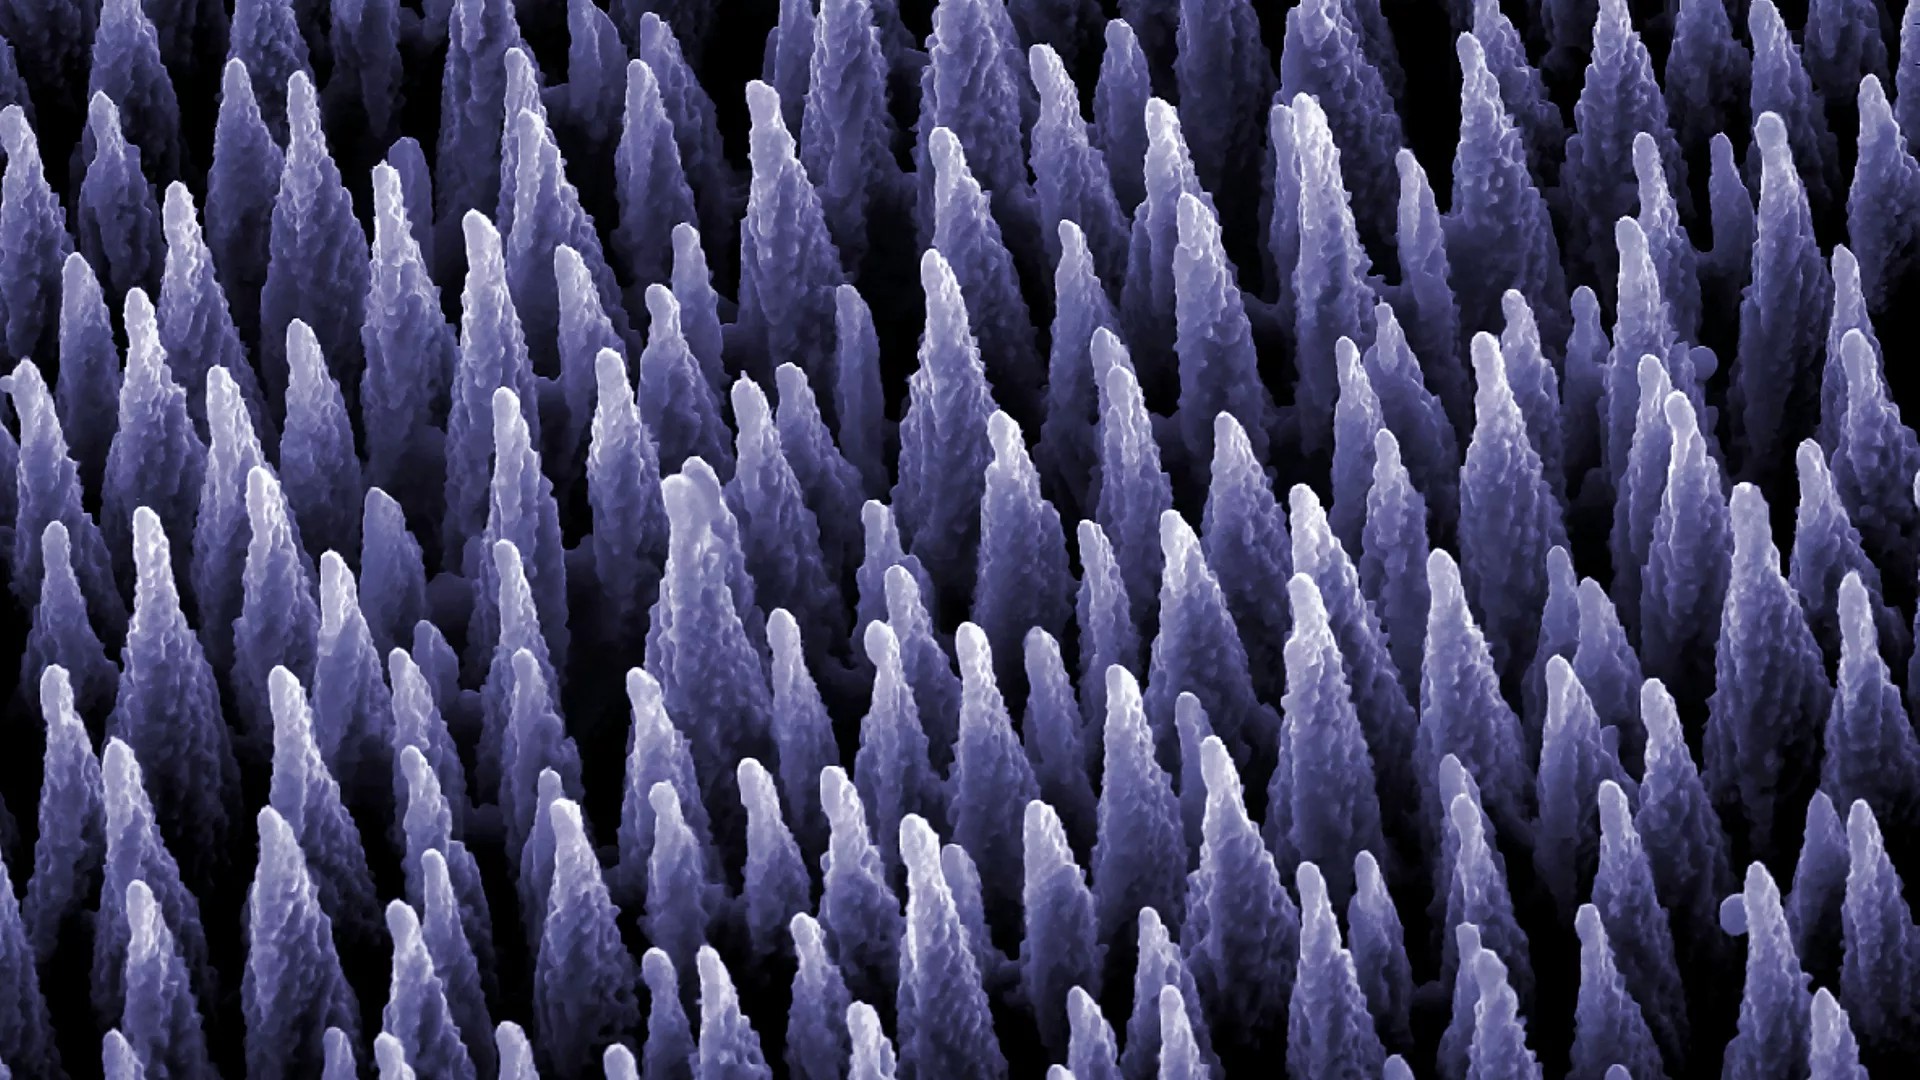 Cover image for "Preparation and Post-Processing Technology for High-Performance Ceramics and Optical Materials"